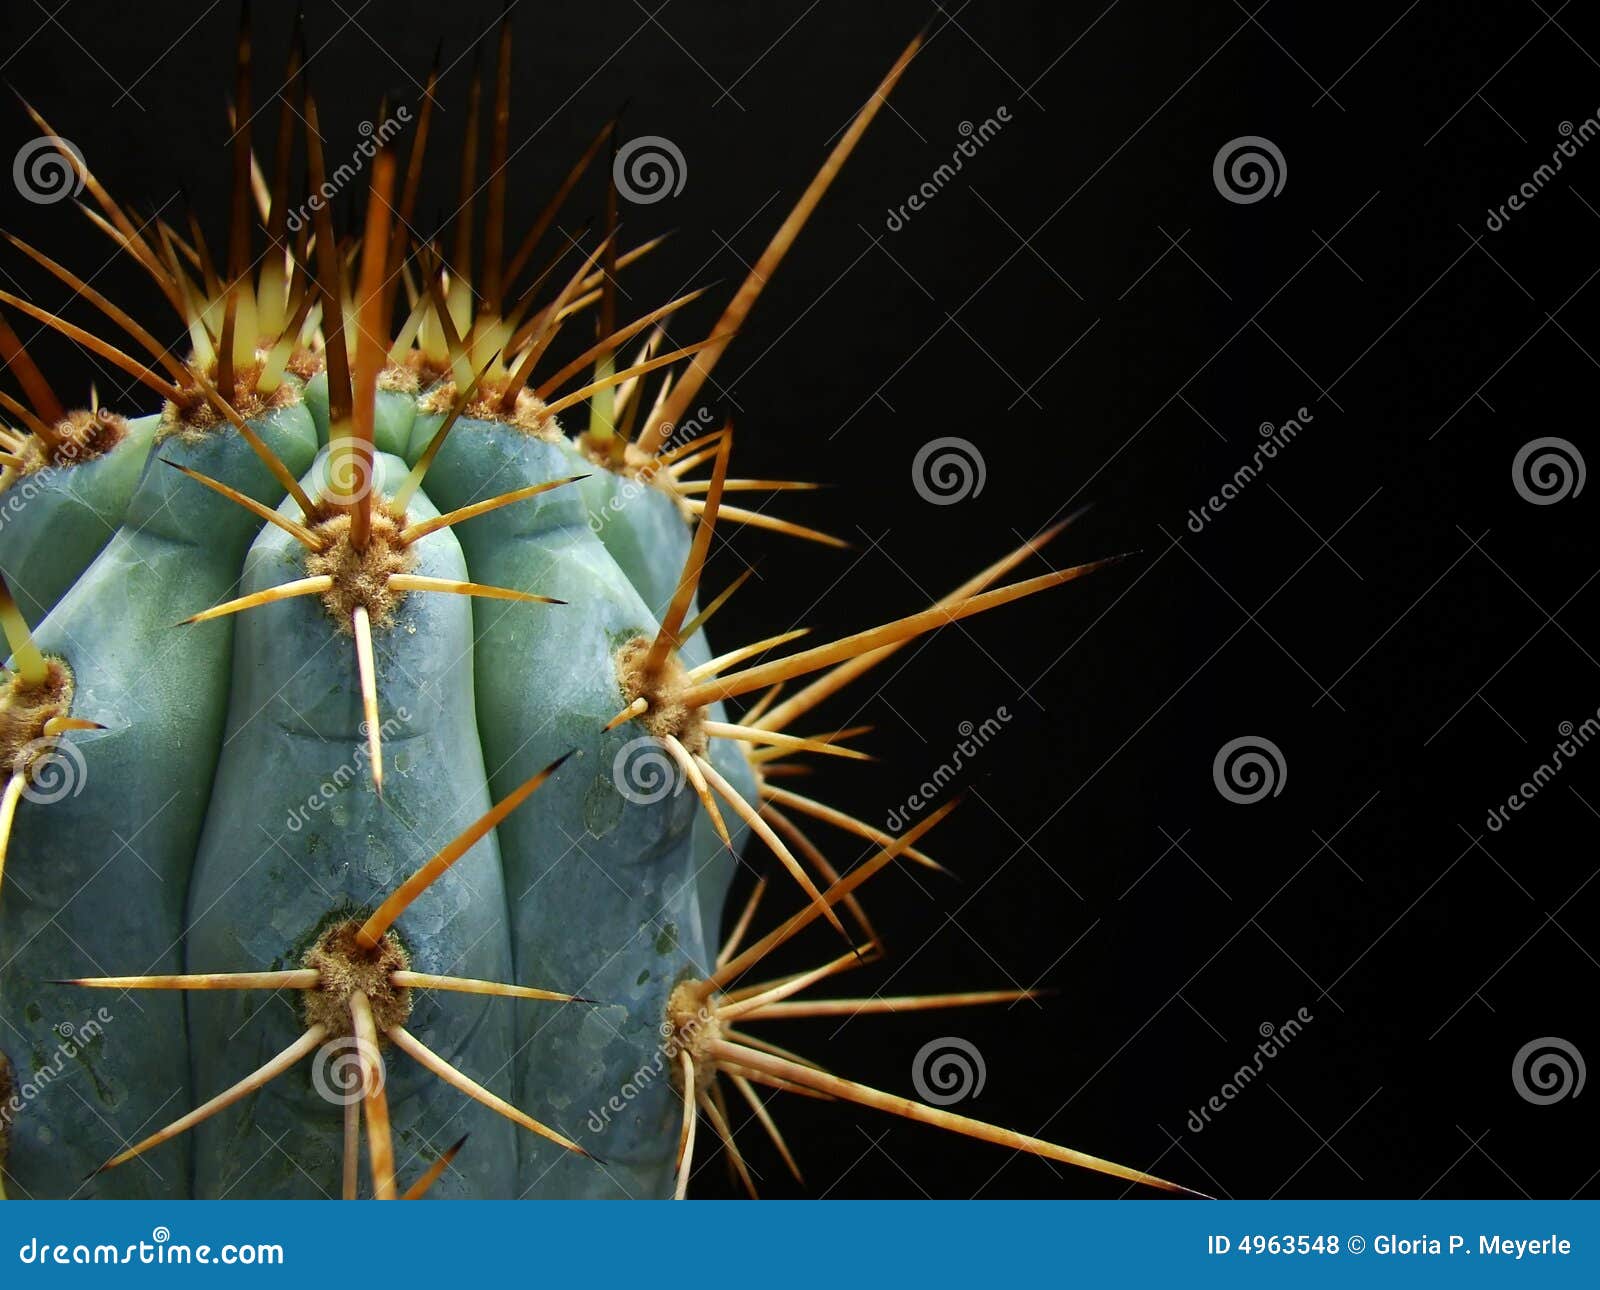 wicked cactus spines